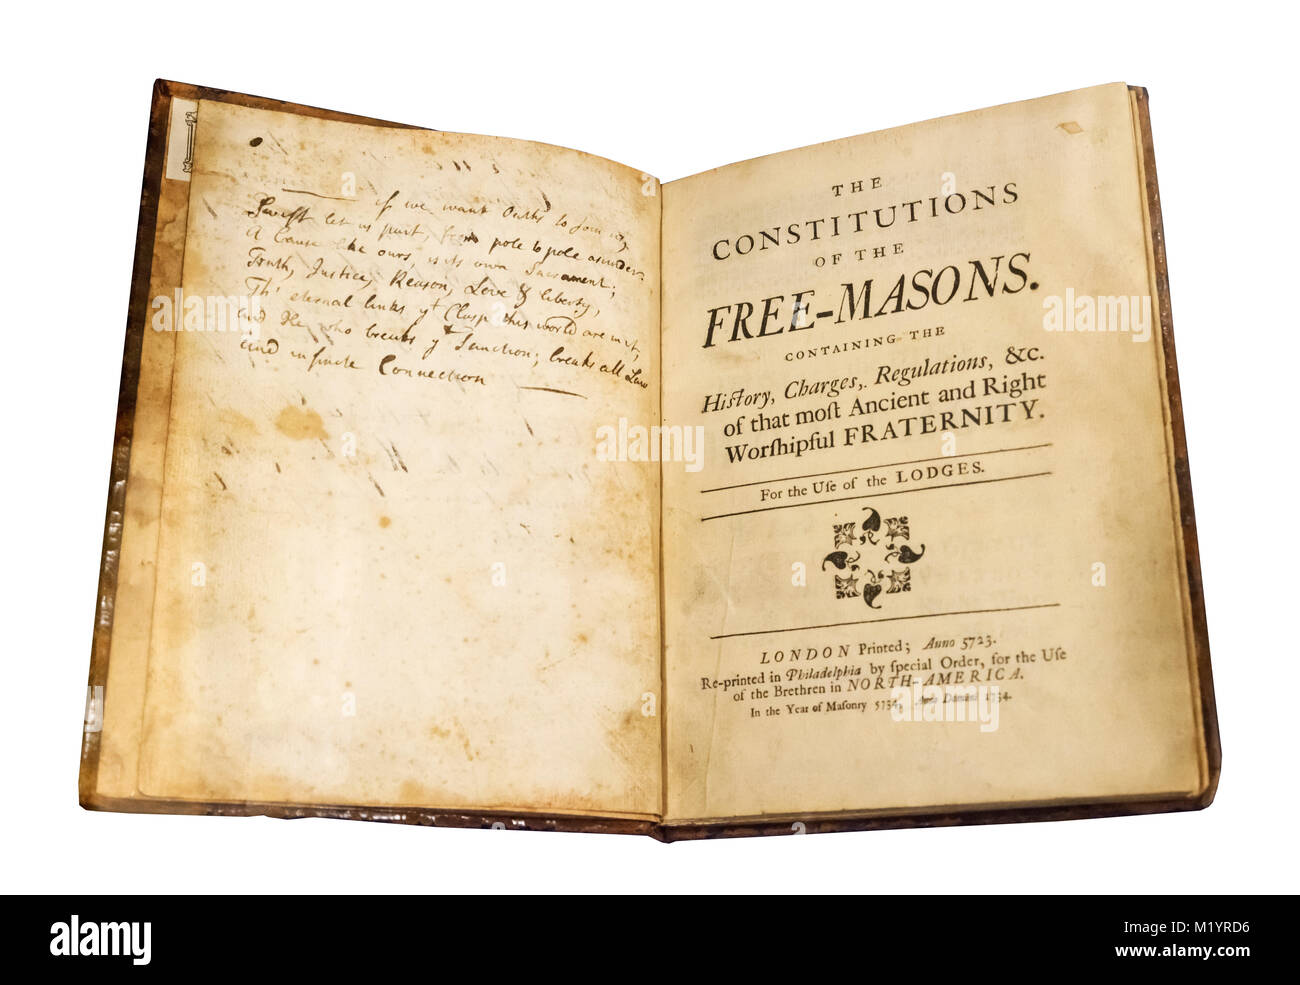 A 1734 edition of the constitution of the Freemasons by James Anderson, published in Philadelphia by Benjamin Franklin. Stock Photo